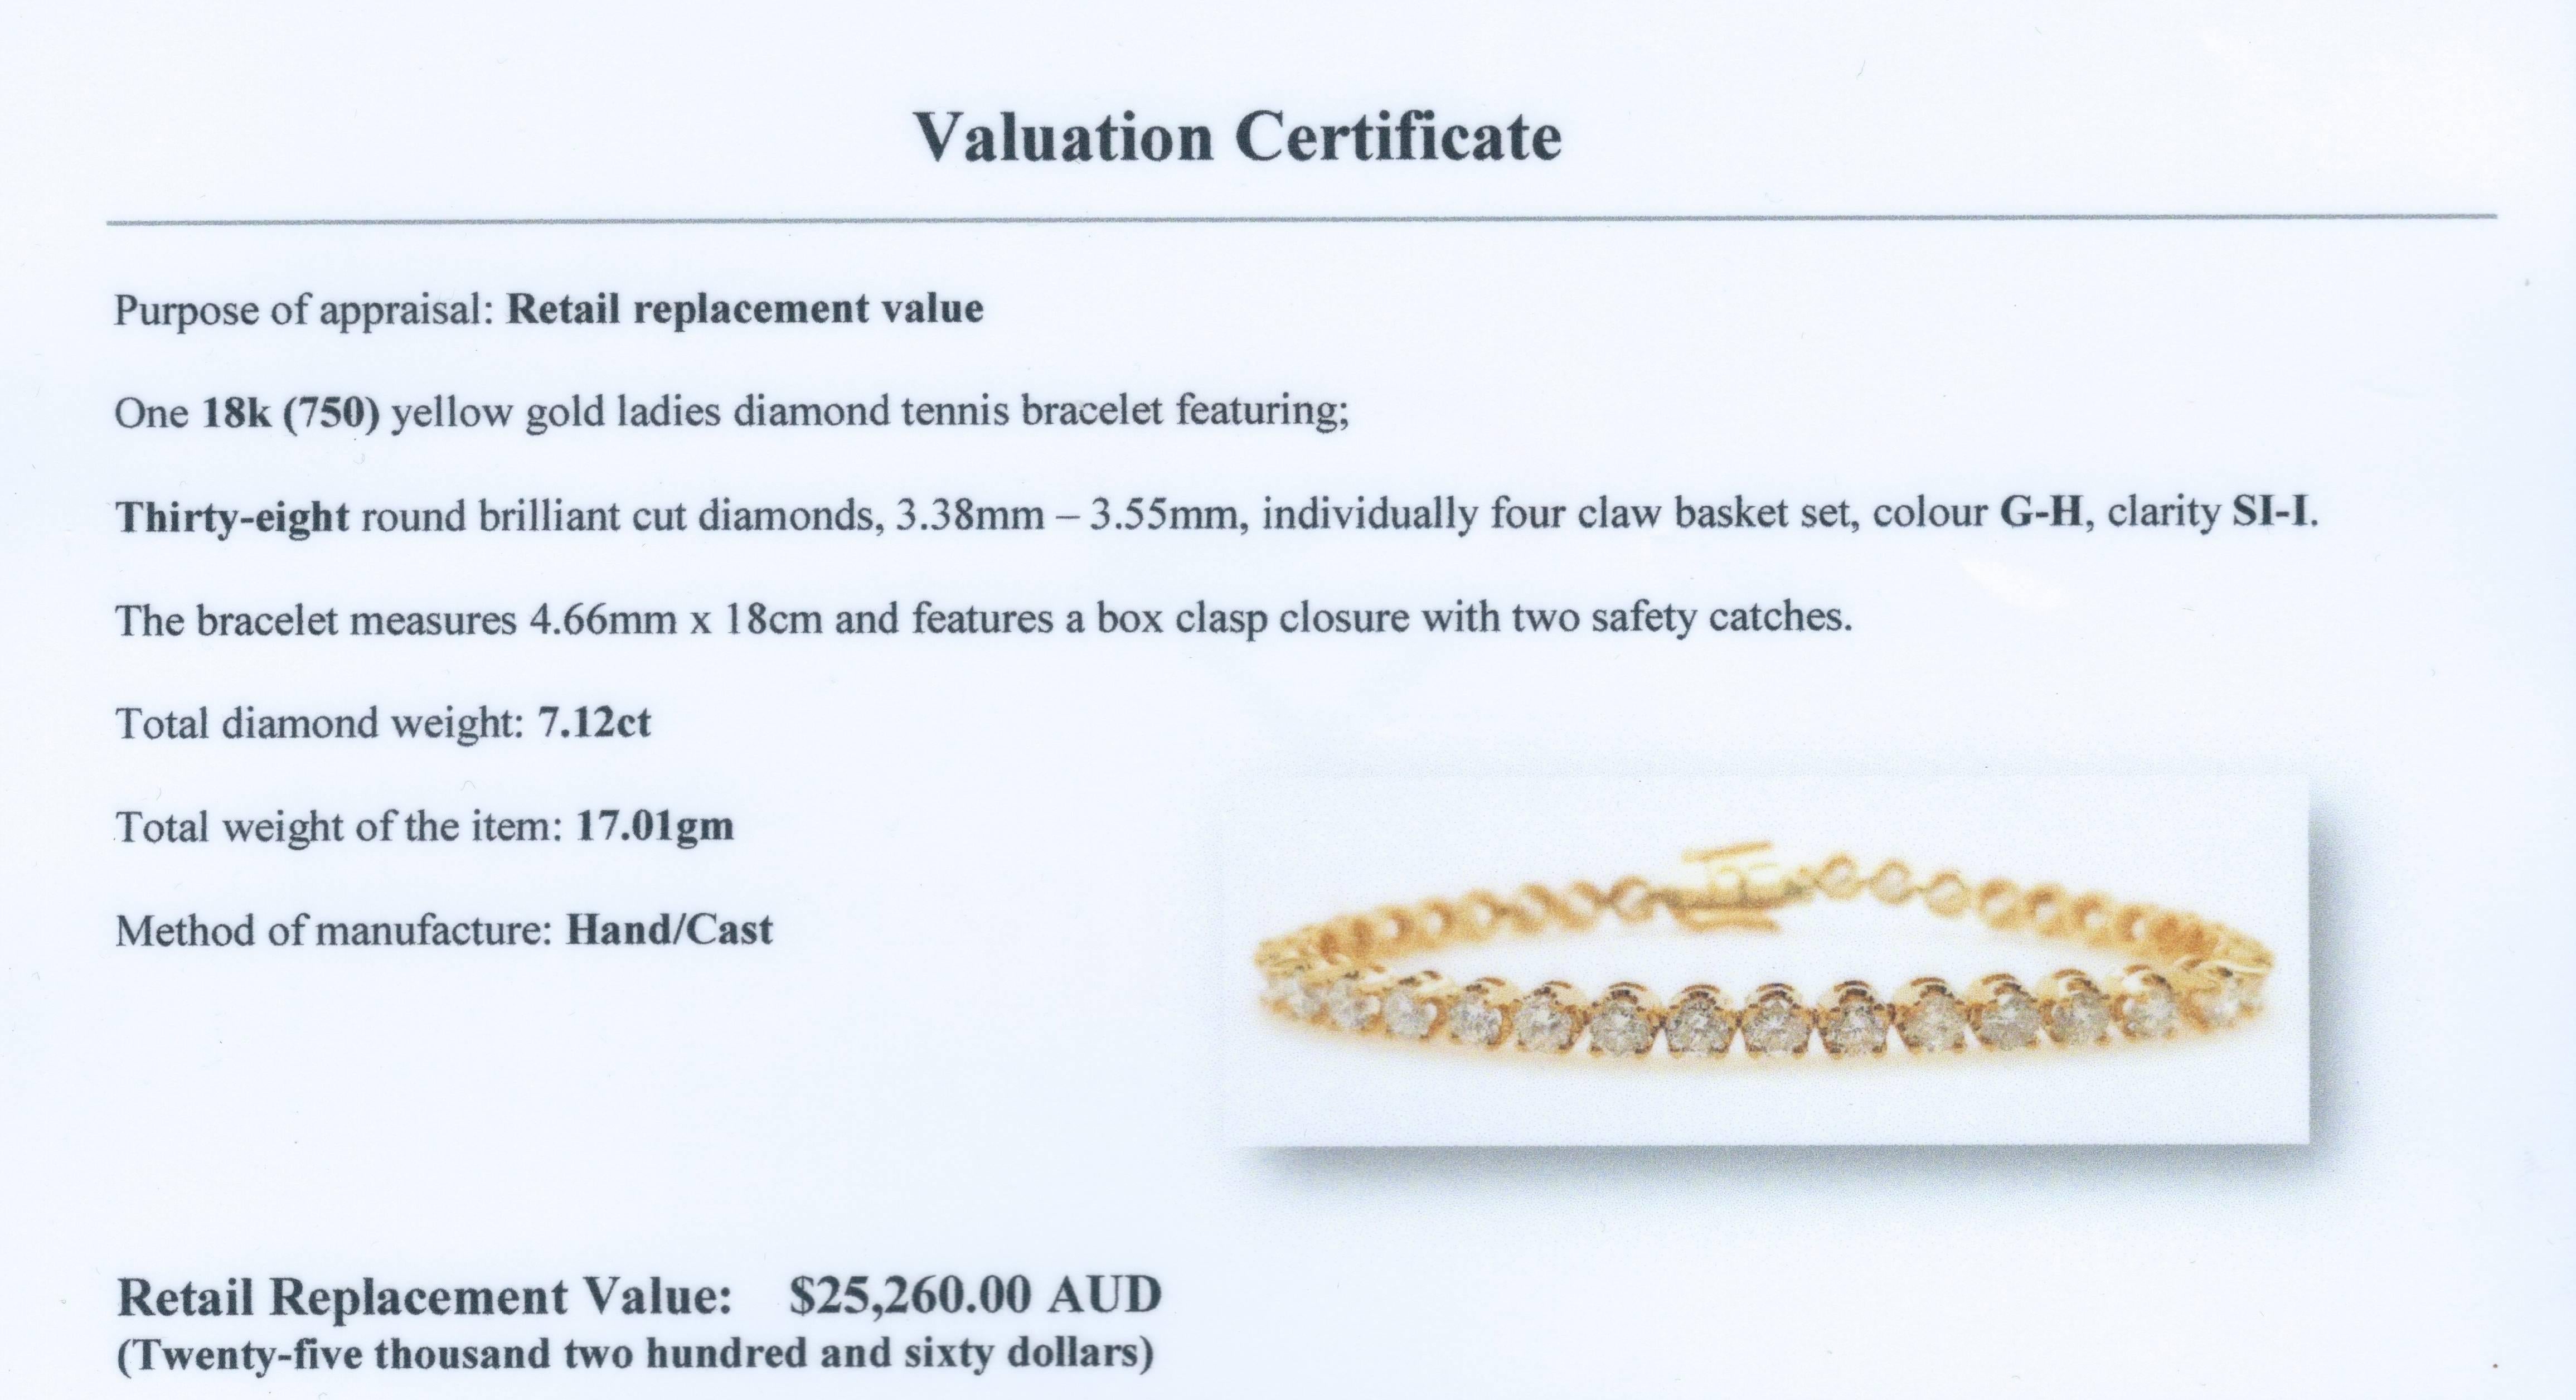 An elegant diamond tennis bracelet 7.12 Carat by Cartmer Jewellery
Valuation Certificate $25,260 

38 Round Brilliant Cut Diamonds four claw set totalling 7.12 carat
18 Carat Yellow Gold
Hand Cast

FREE express postage usually 3-4 days Sydney to New